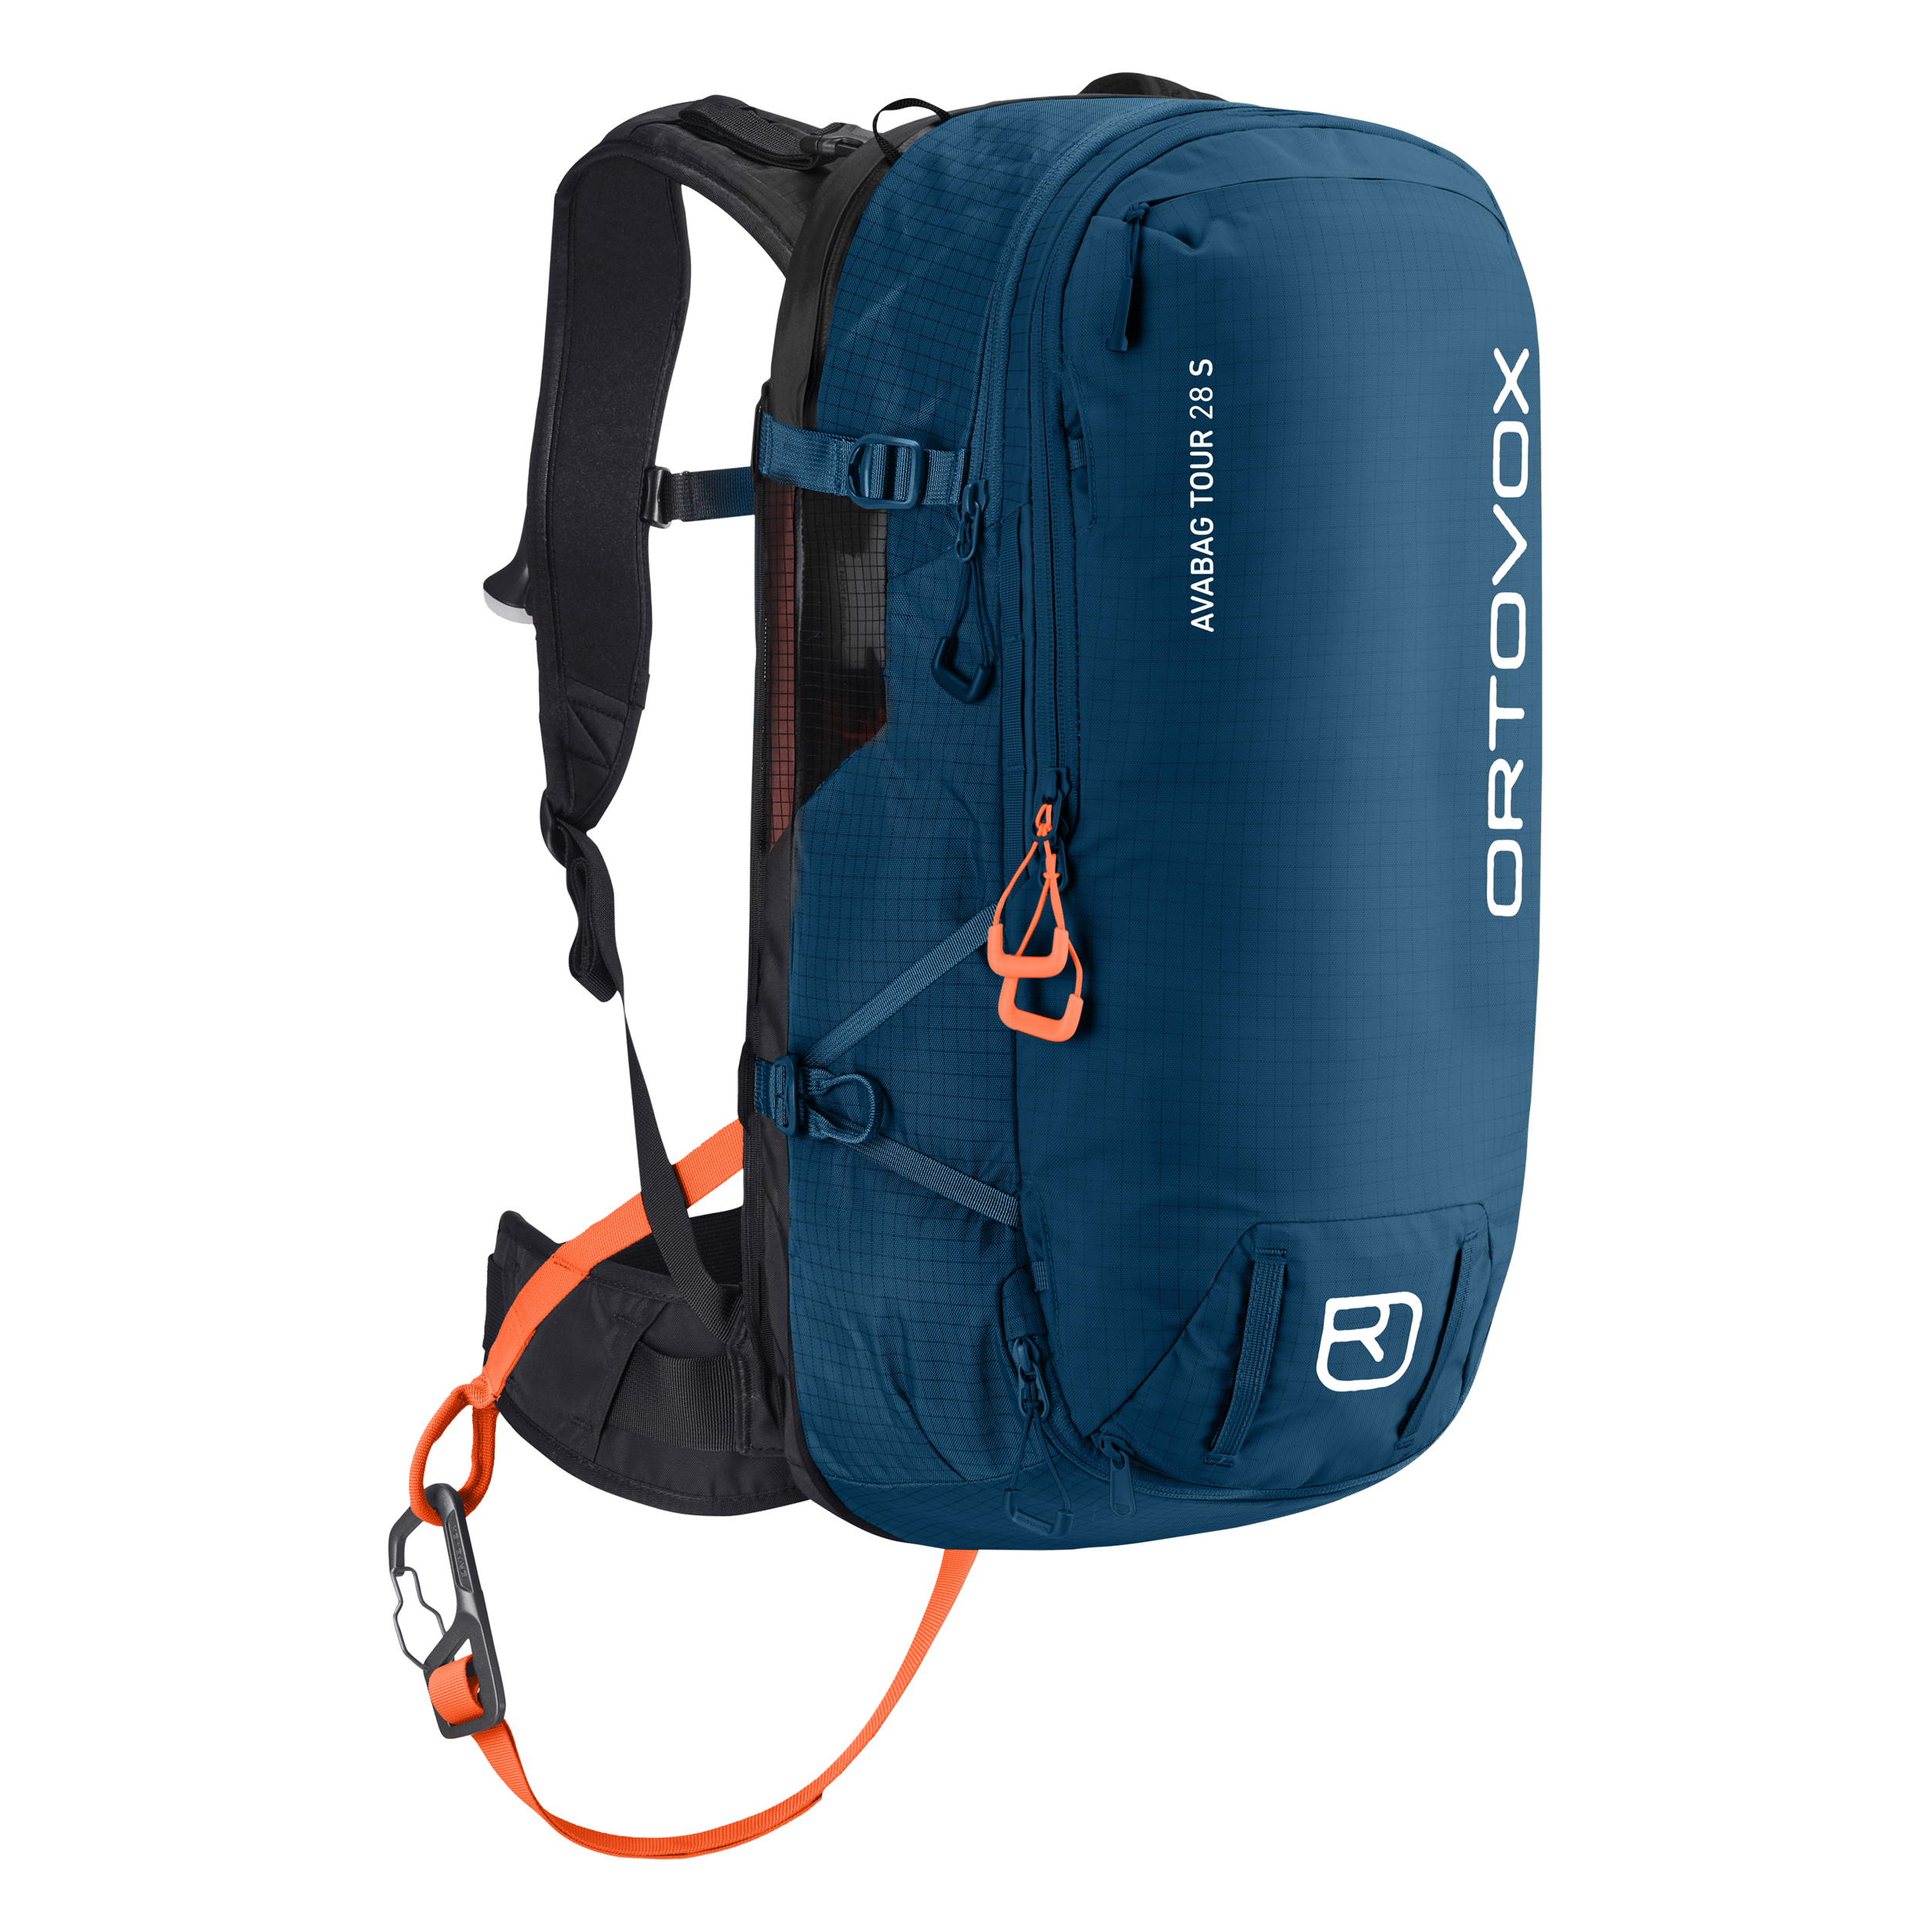 ortovox Avalanche Airbag Petrol Blue Litric Tour 28S Avalanche Airbag 49220PB